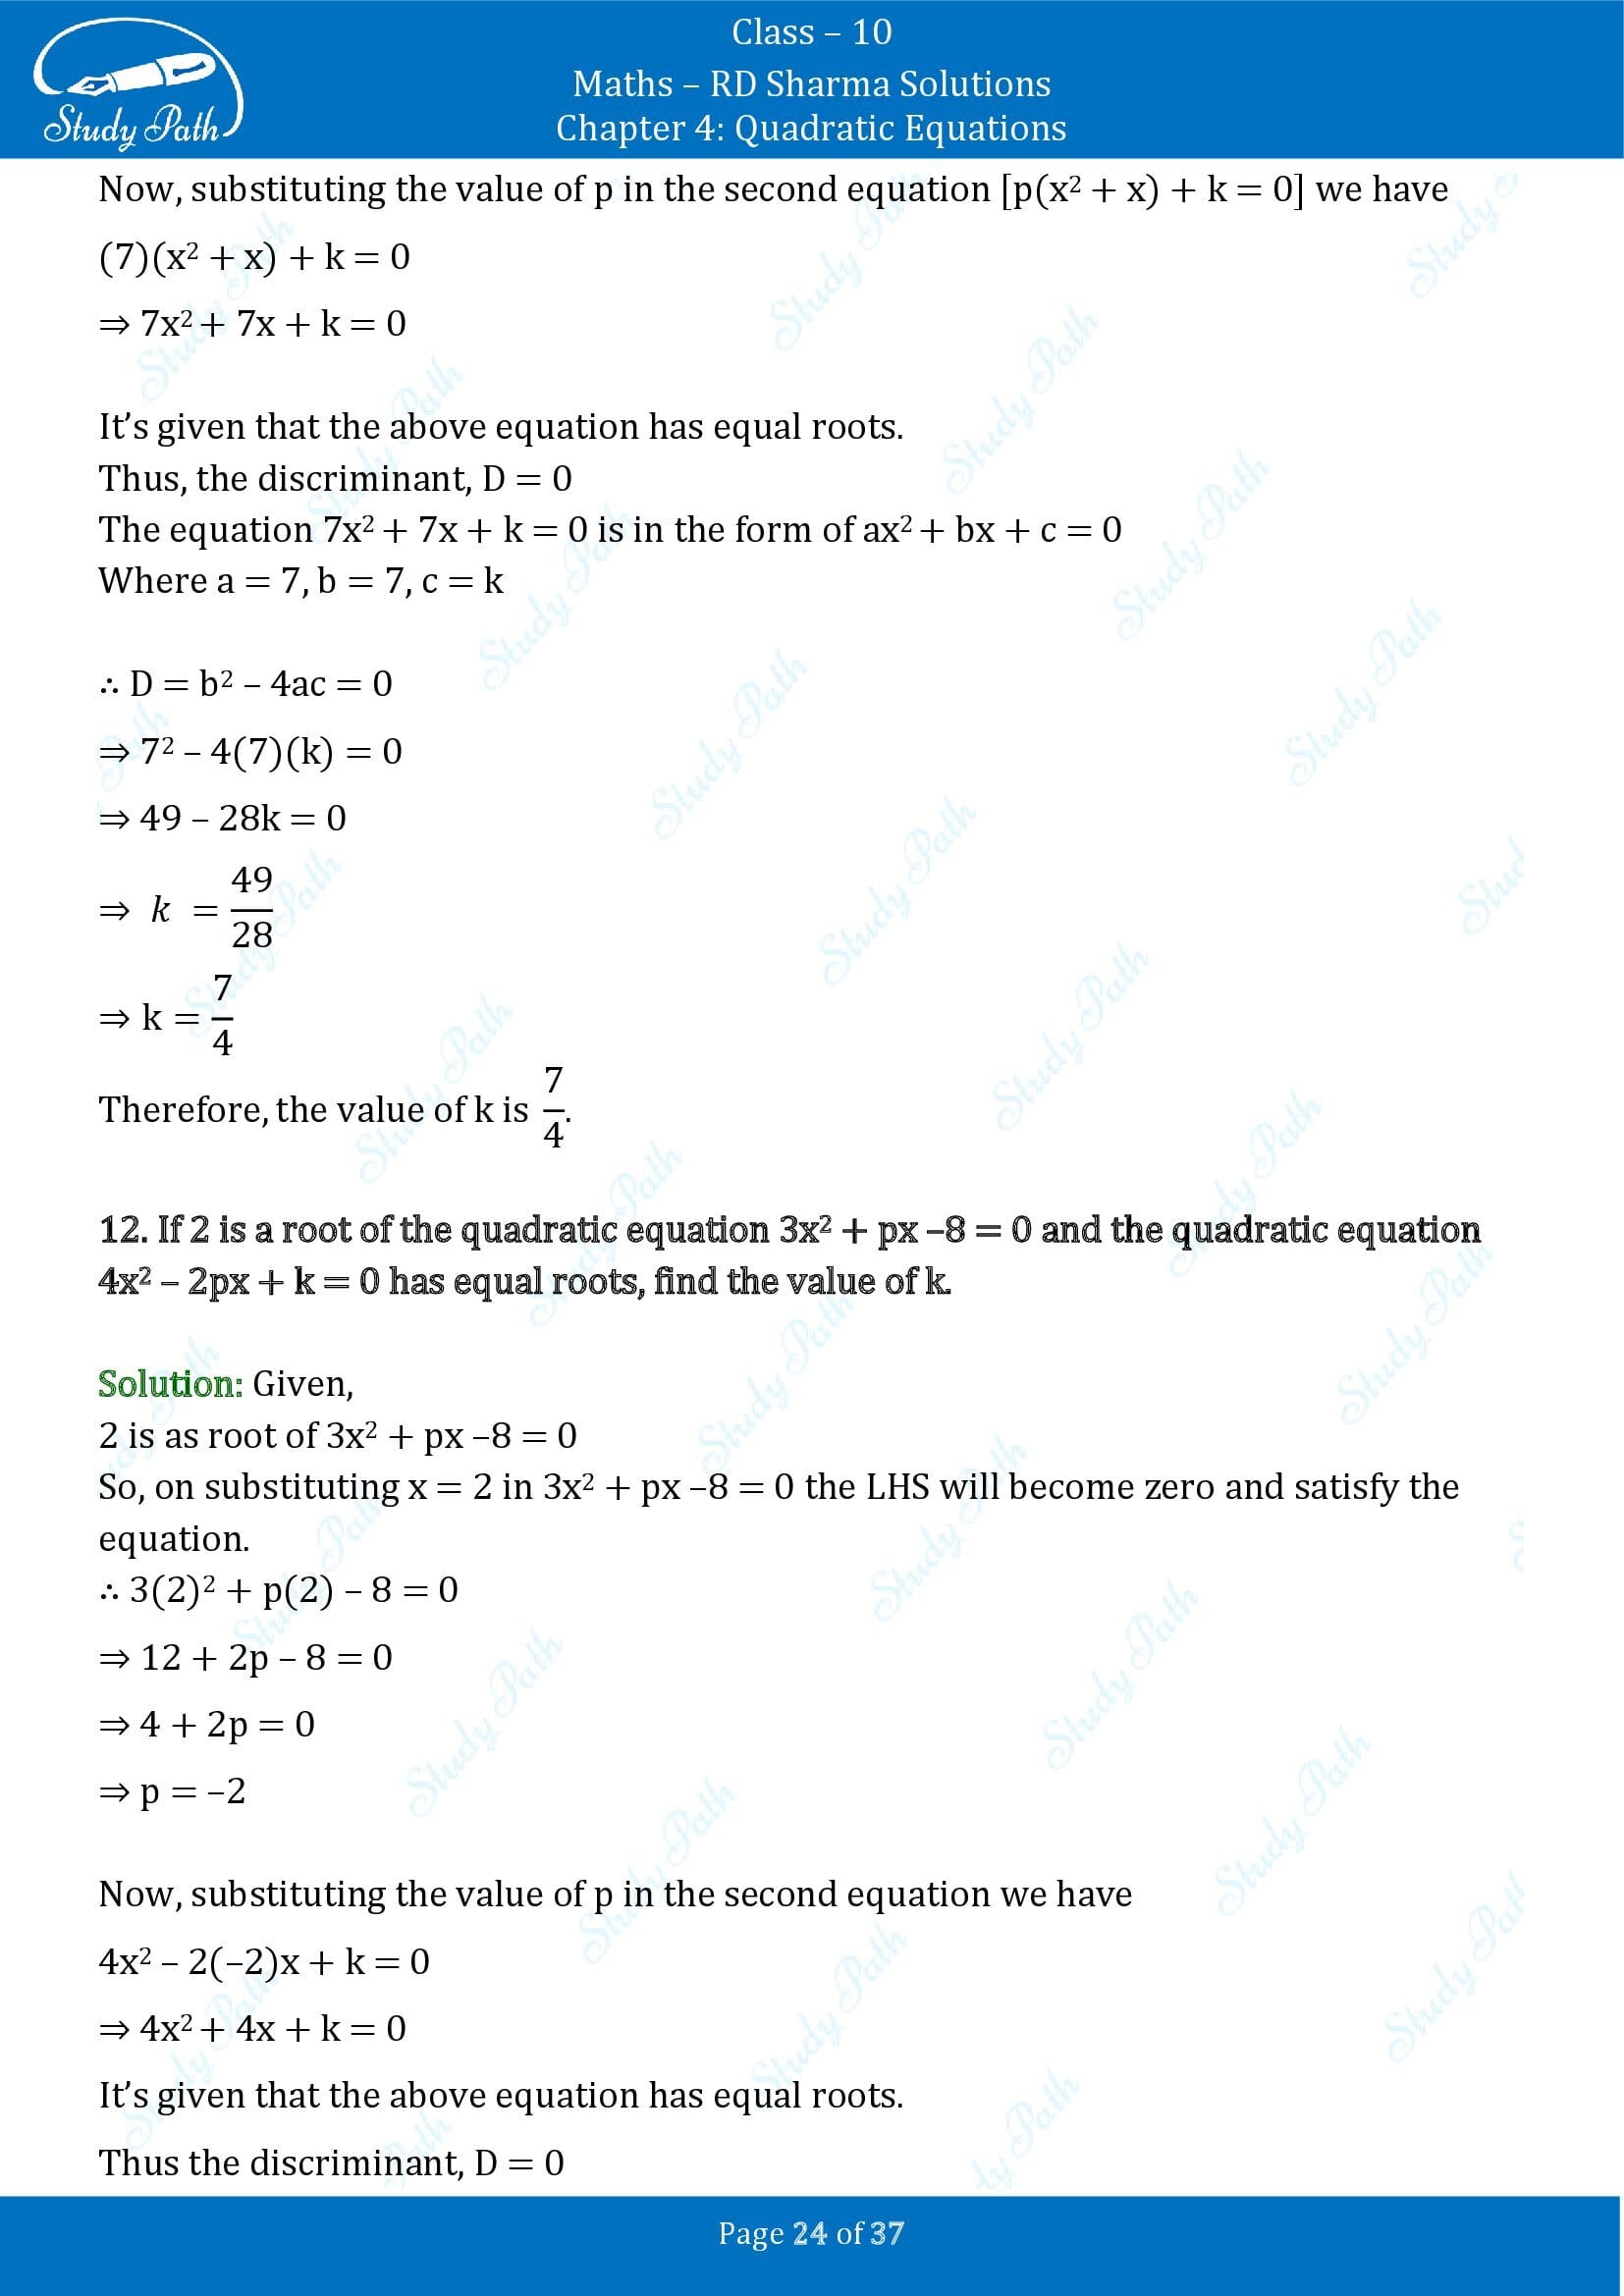 RD Sharma Solutions Class 10 Chapter 4 Quadratic Equations Exercise 4.6 00024